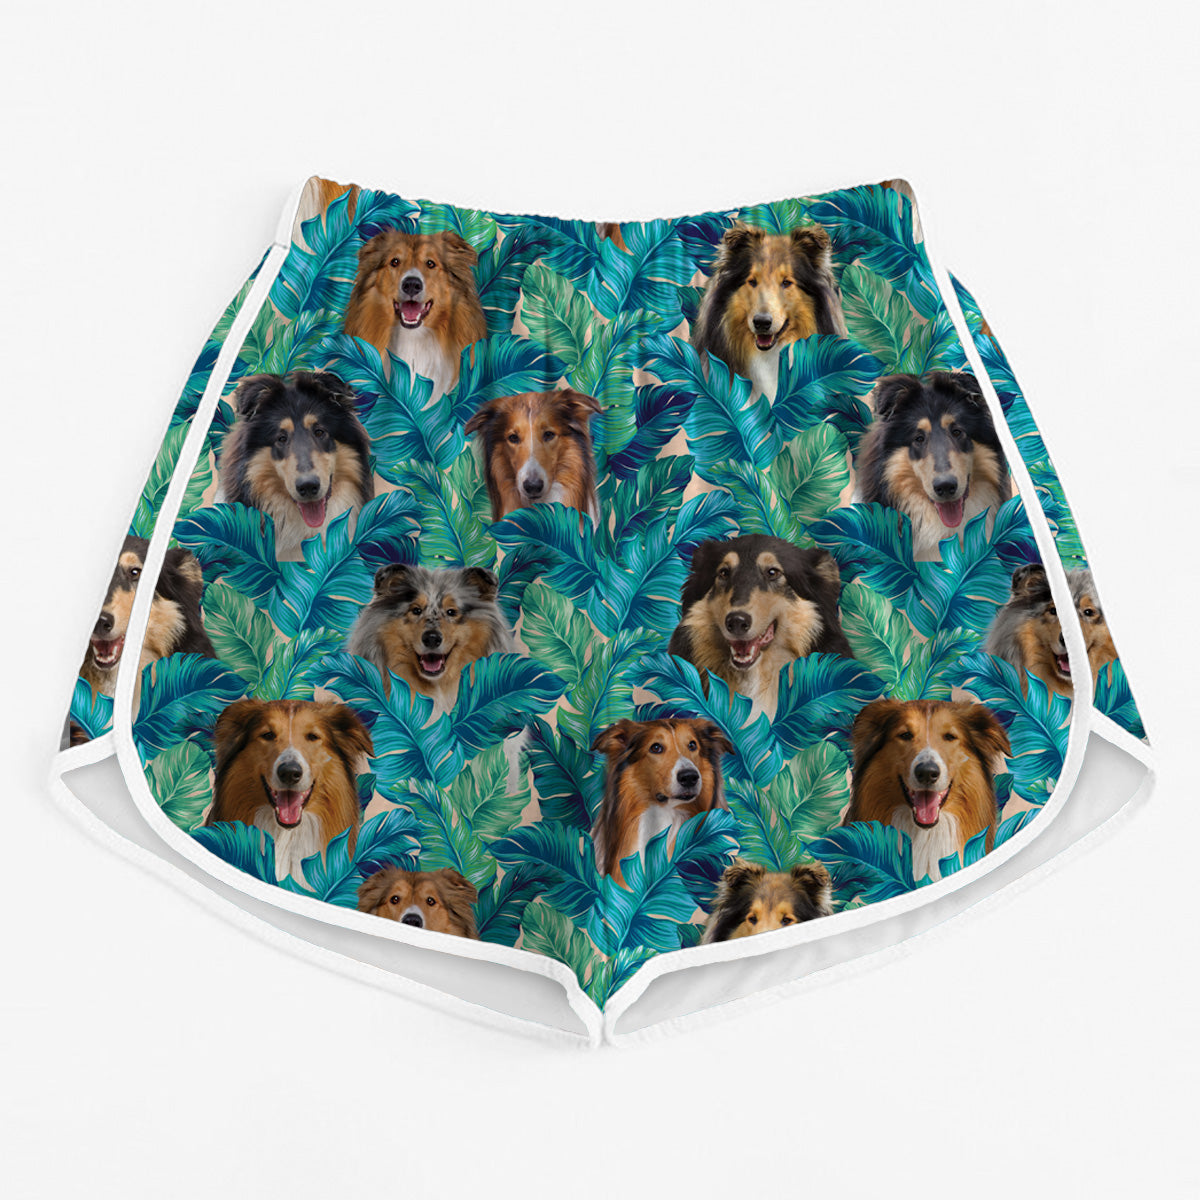 Rough Collie - Colorful Women's Running Shorts V1